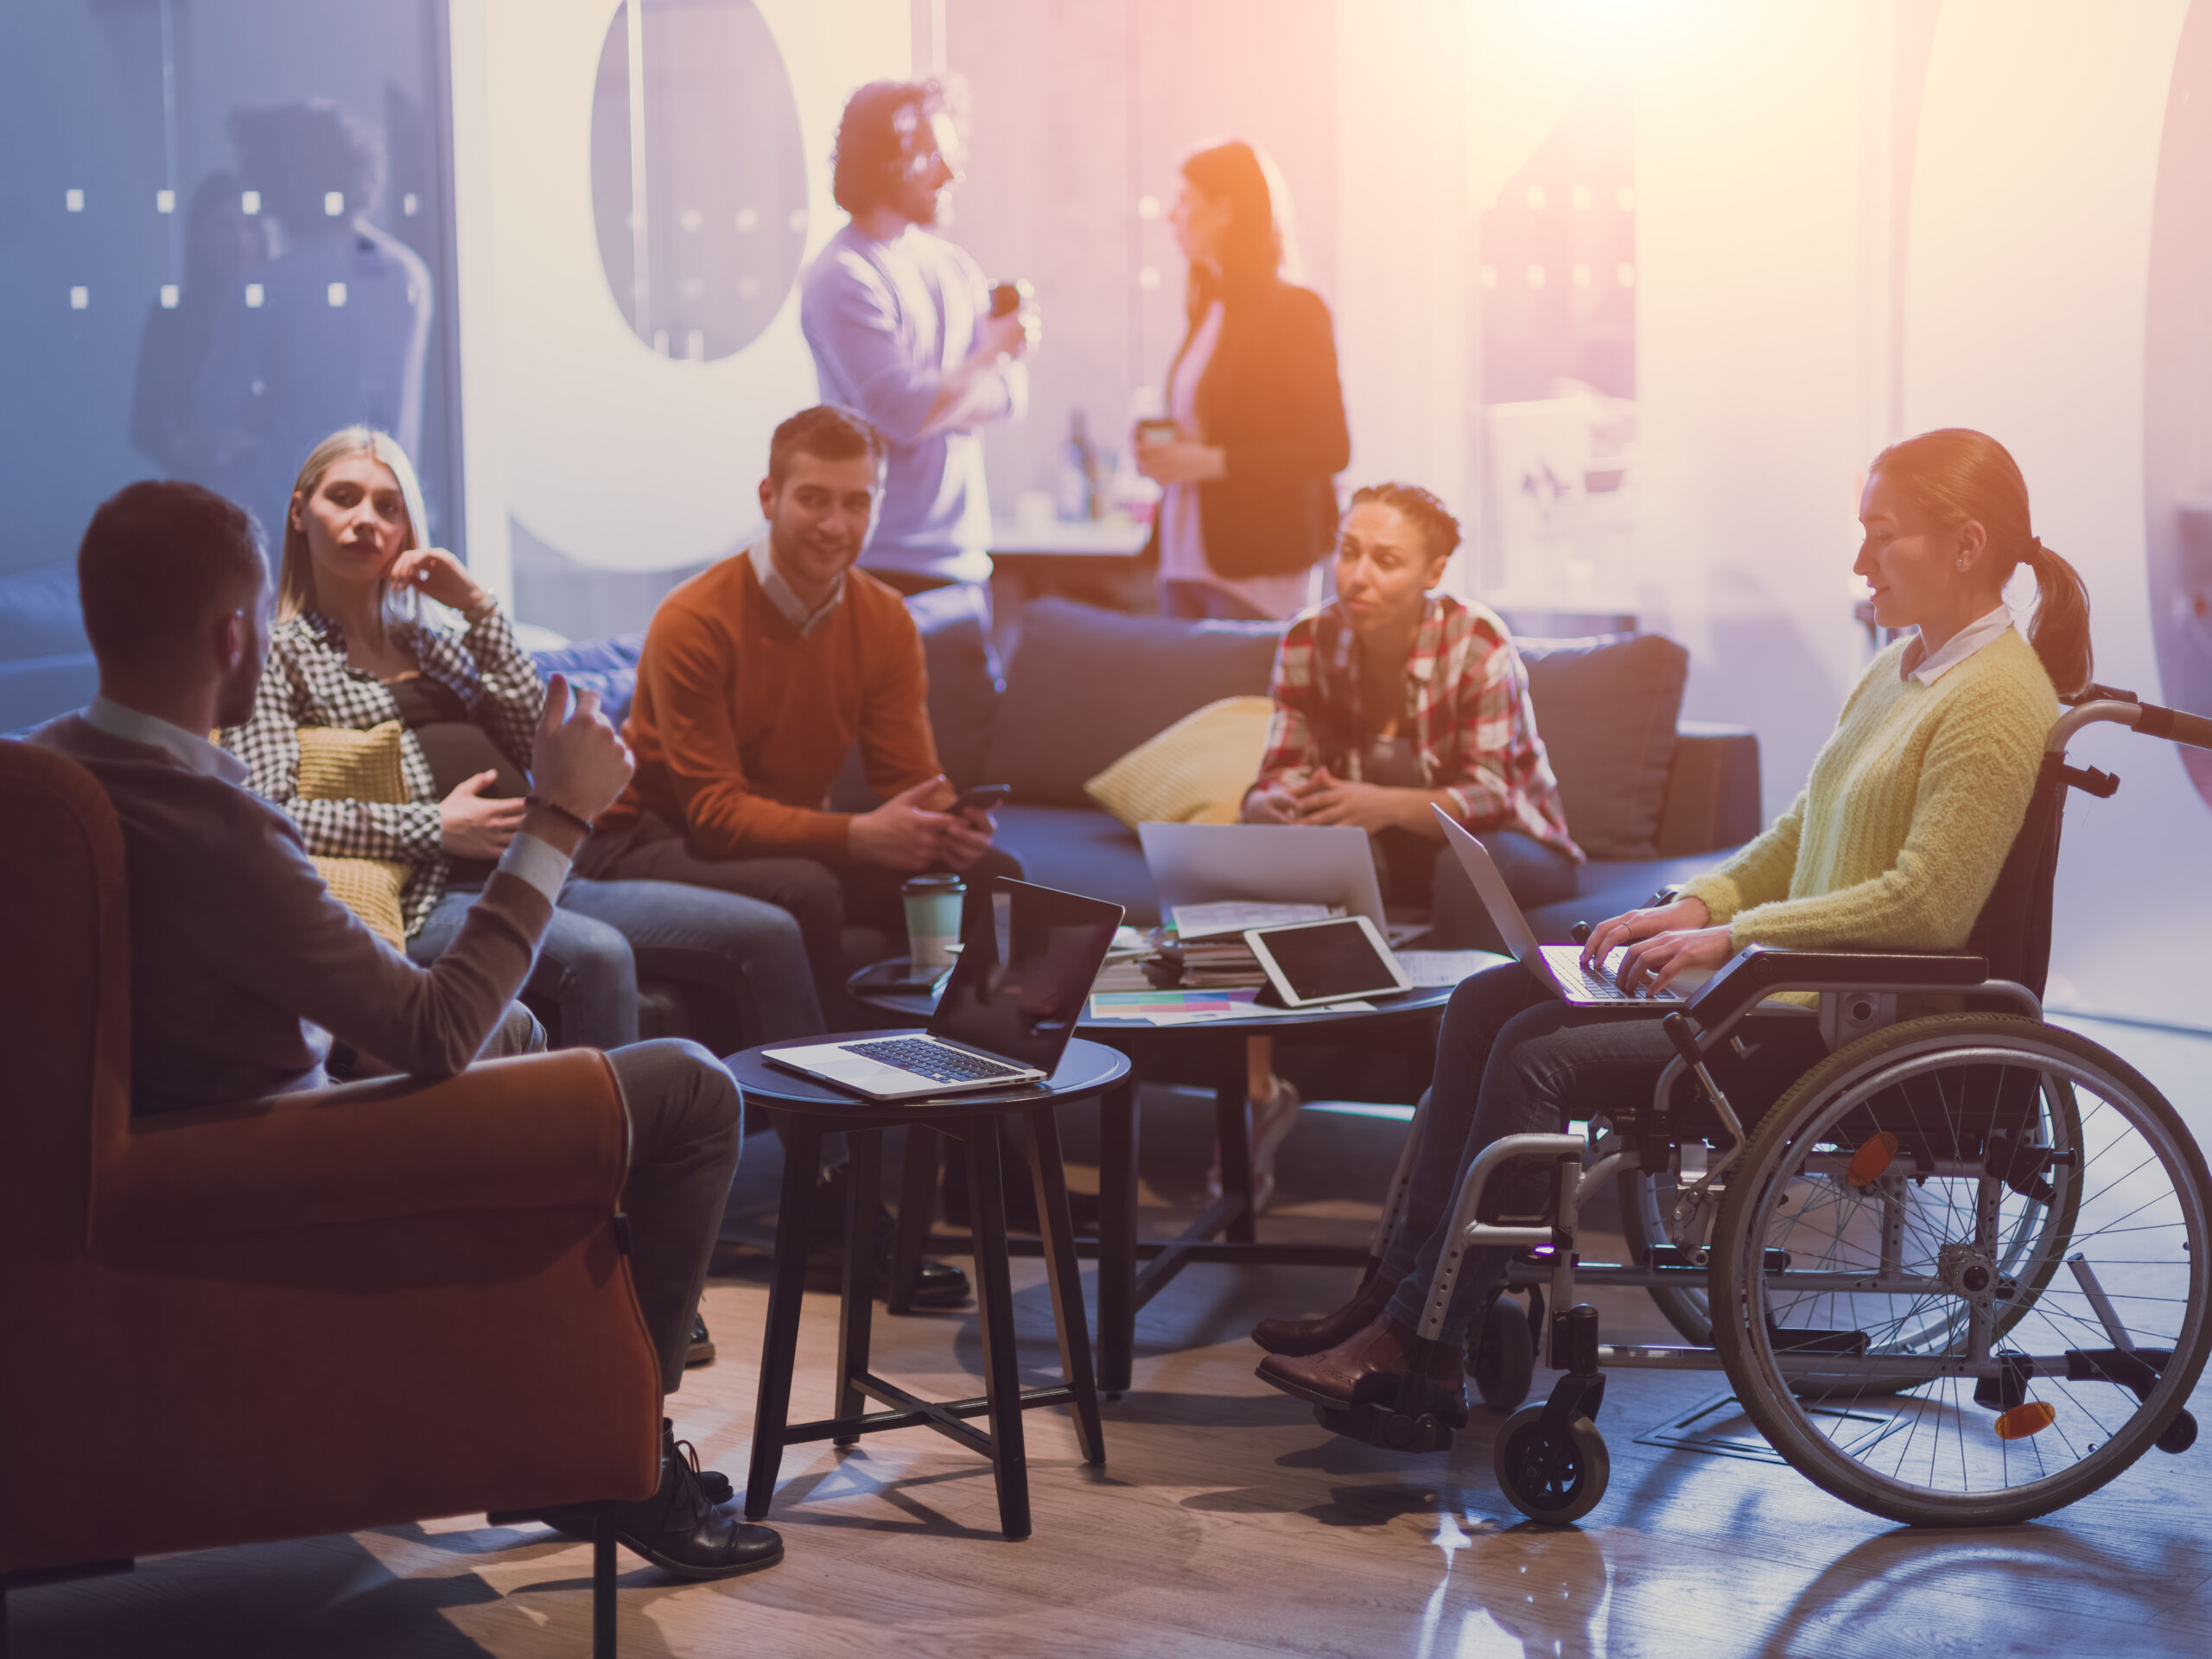 businesswoman in a wheelchair on meeting with her diverse business team brainstorming about ideas and plans in a modern open space coworking office.